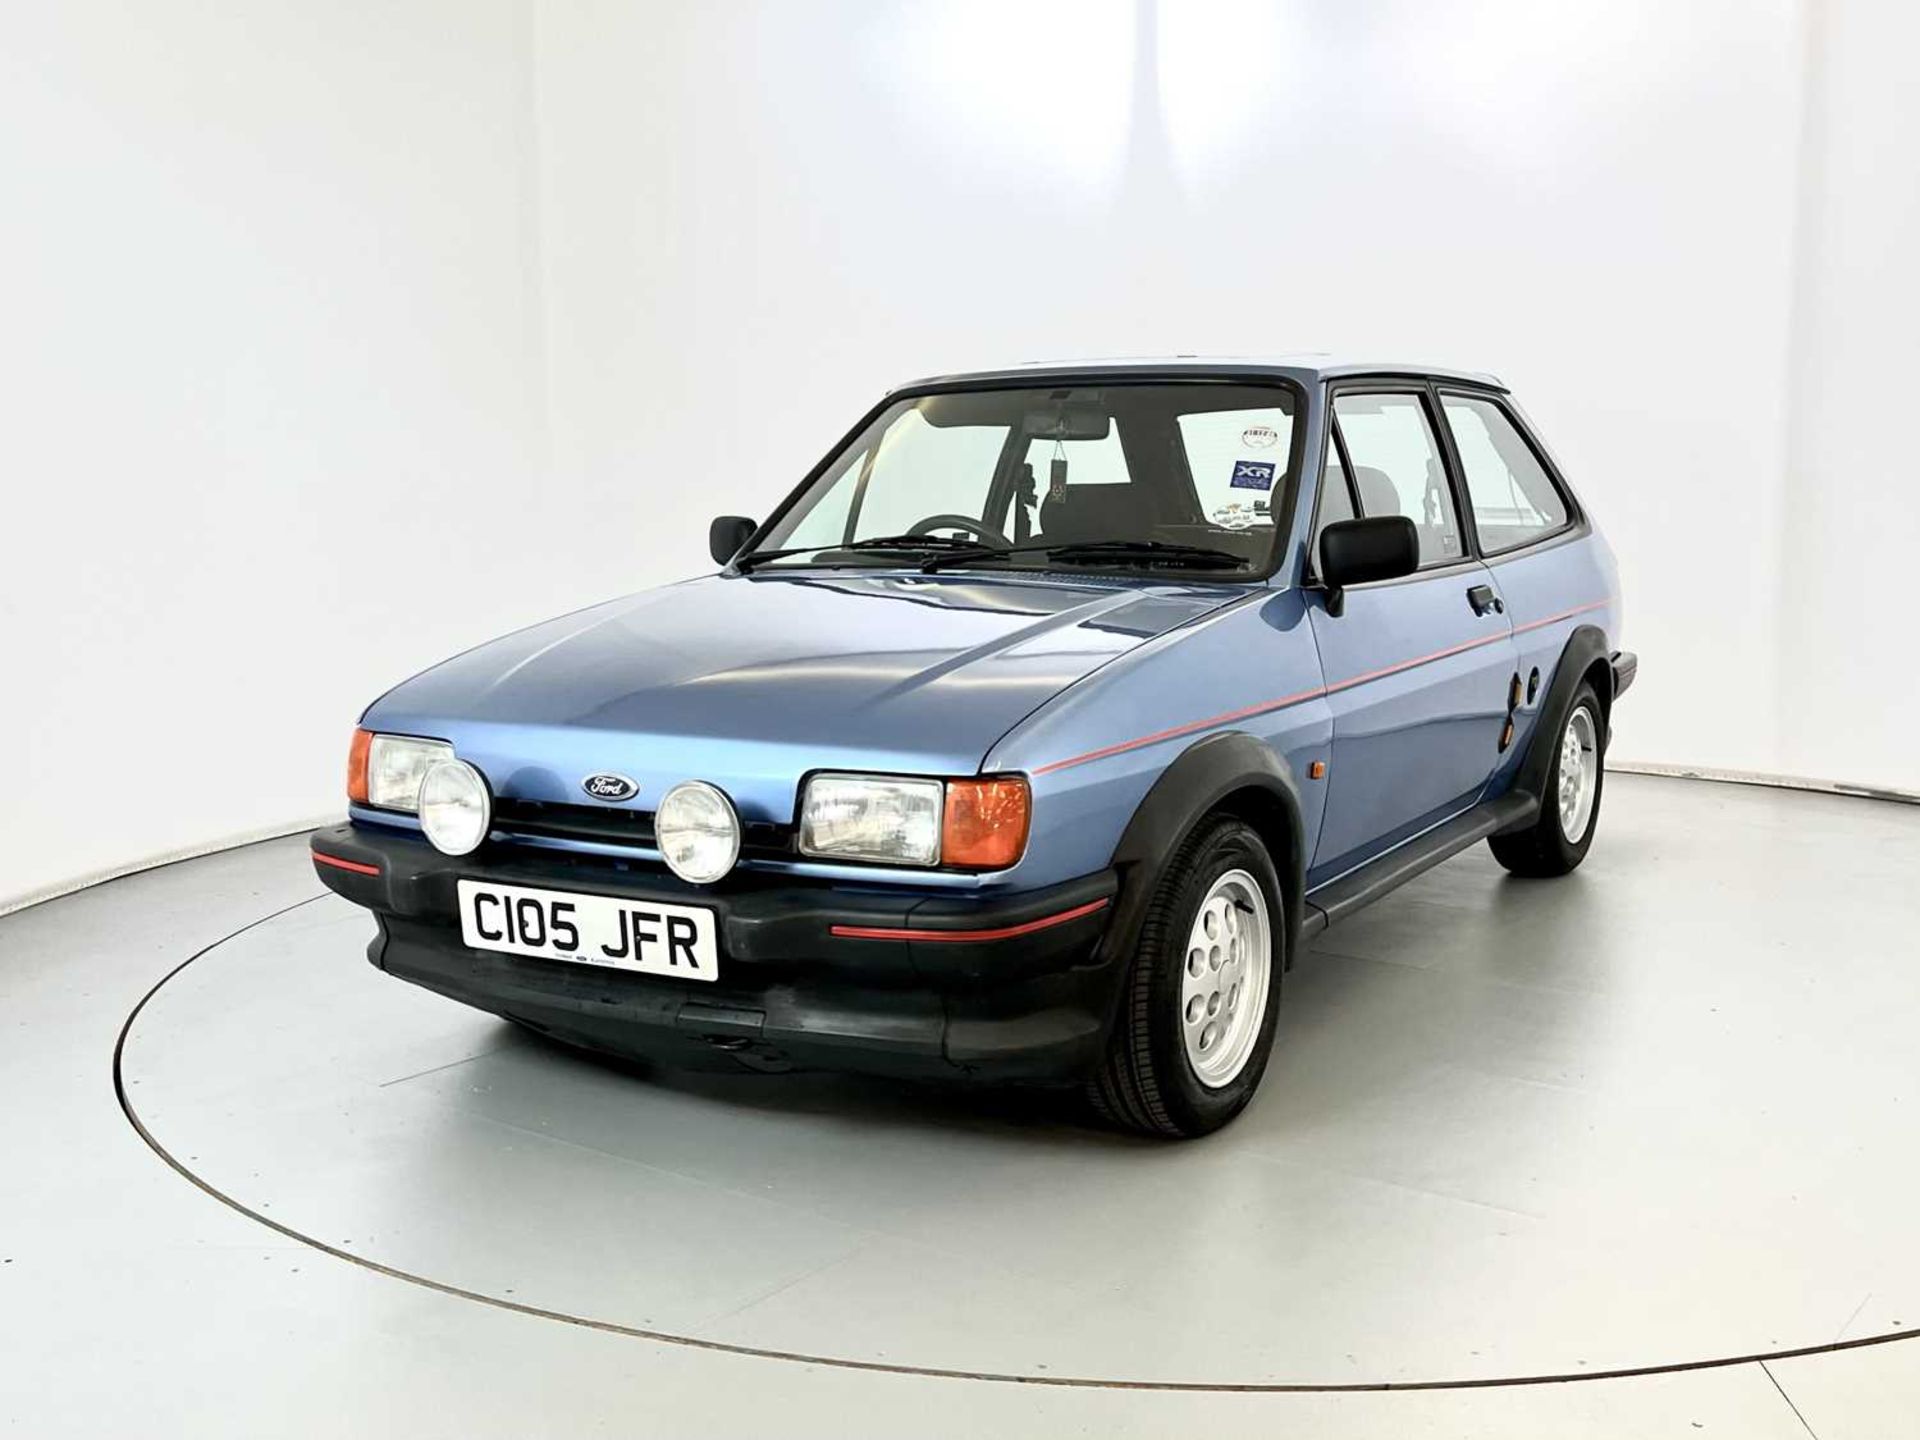 1986 Ford Fiesta XR2 - Image 3 of 33